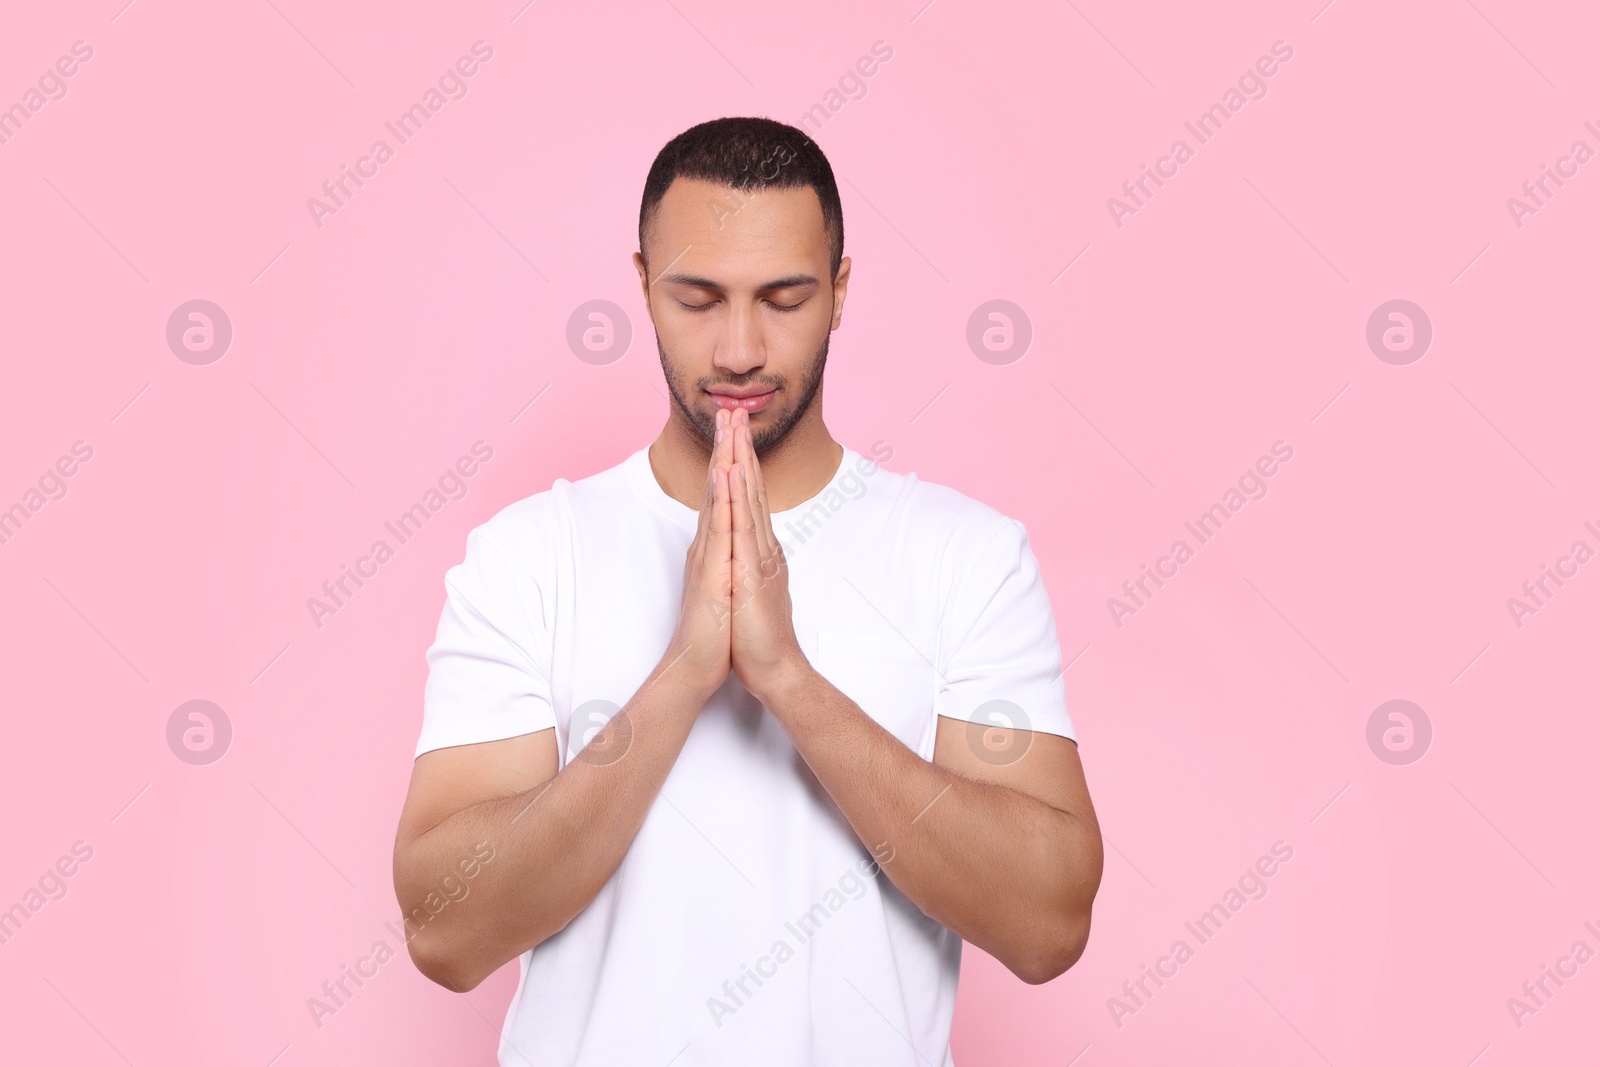 Photo of African American man with clasped hands praying to God on pink background